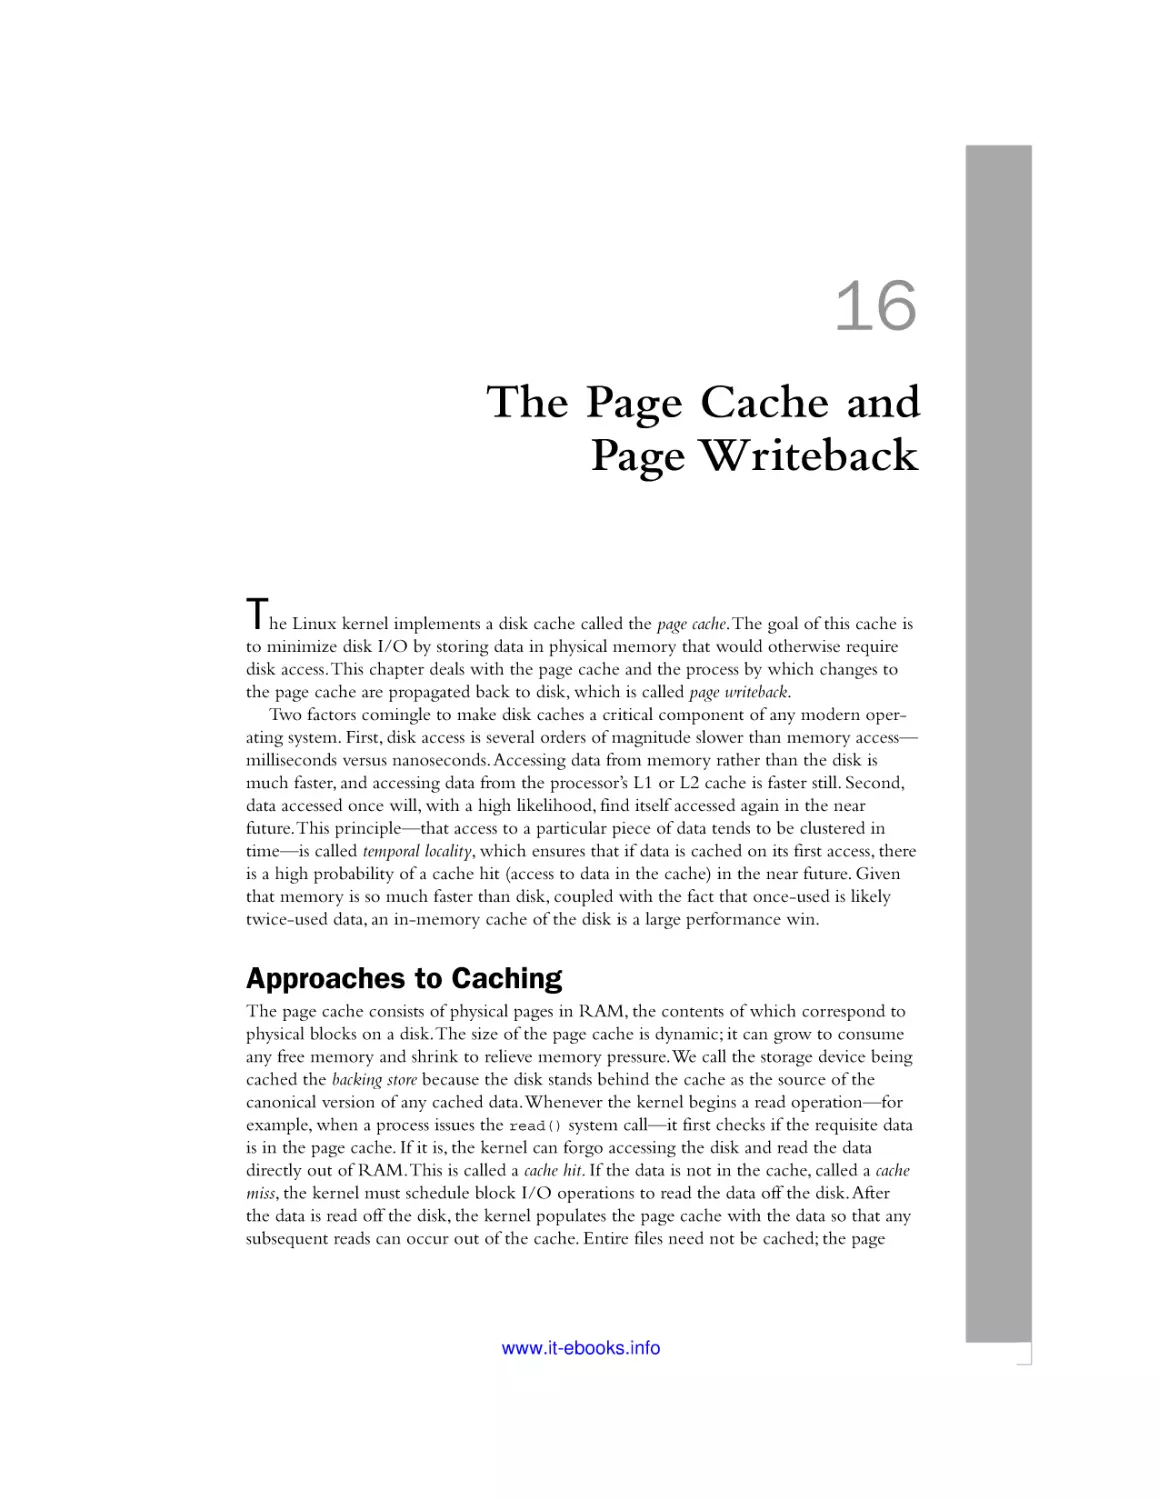 16 The Page Cache and Page Writeback
Approaches to Caching